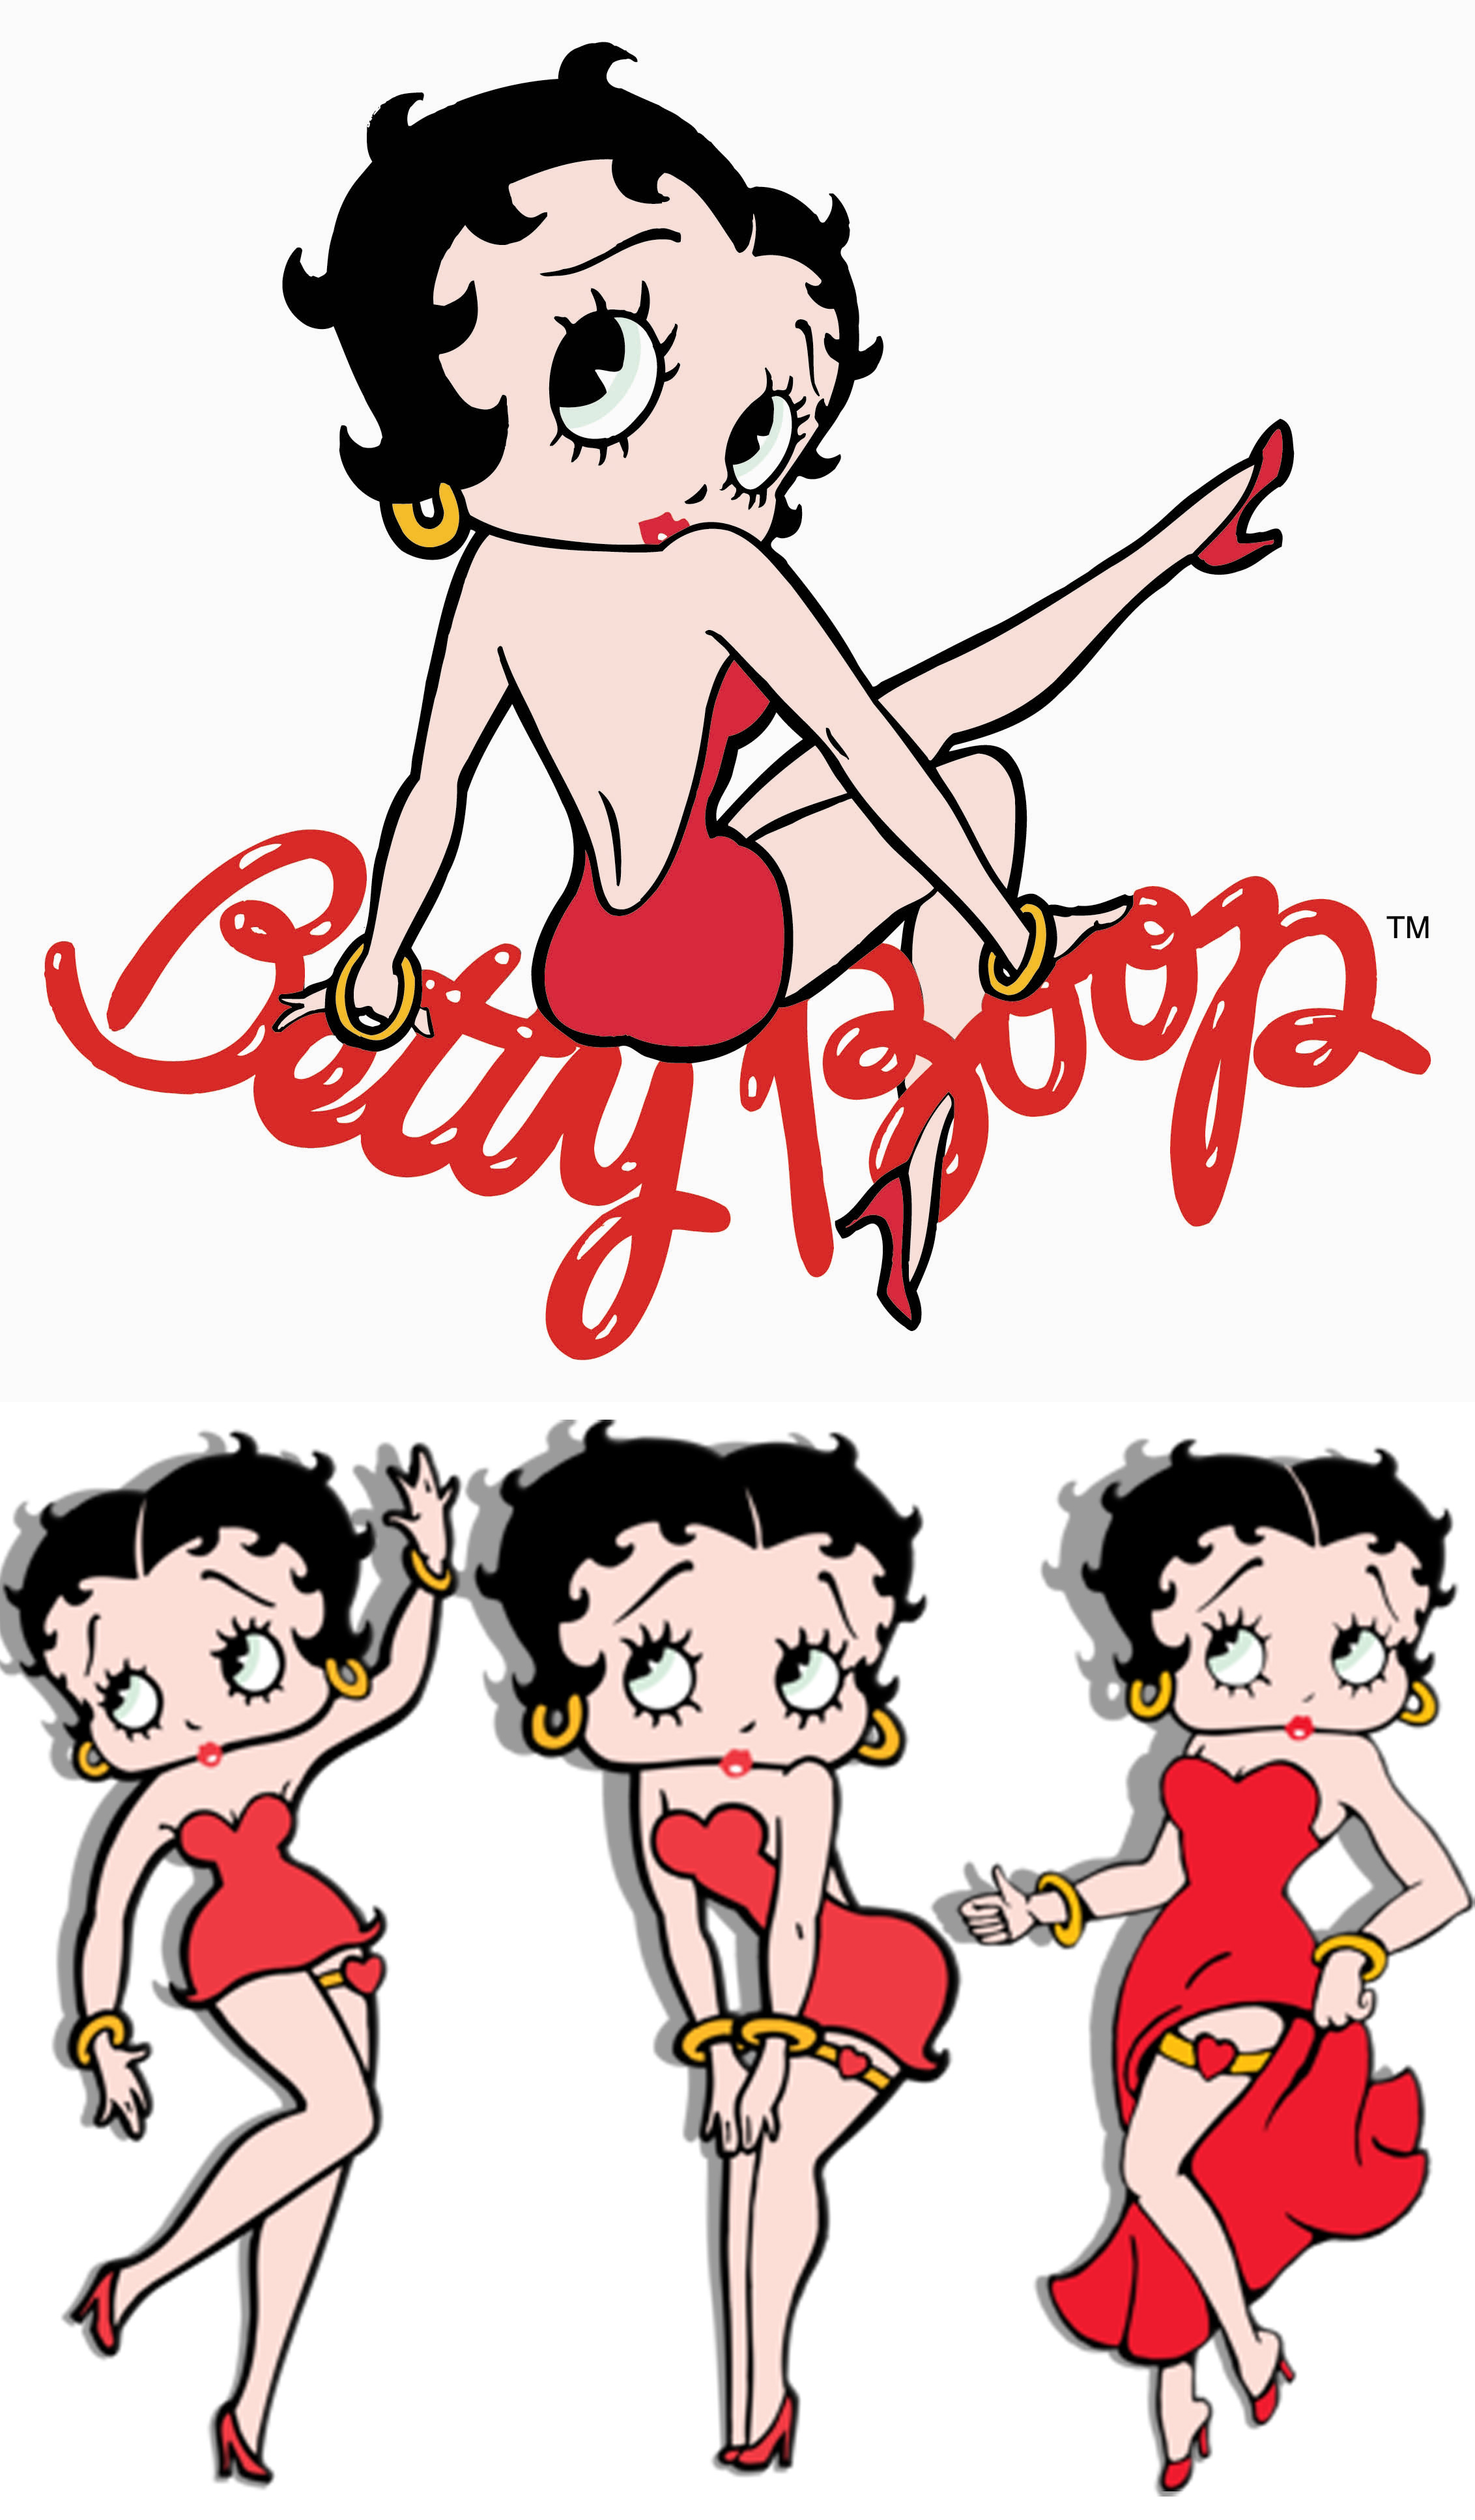 Betty Boop makes her cartoon debut in Dizzy Dishes